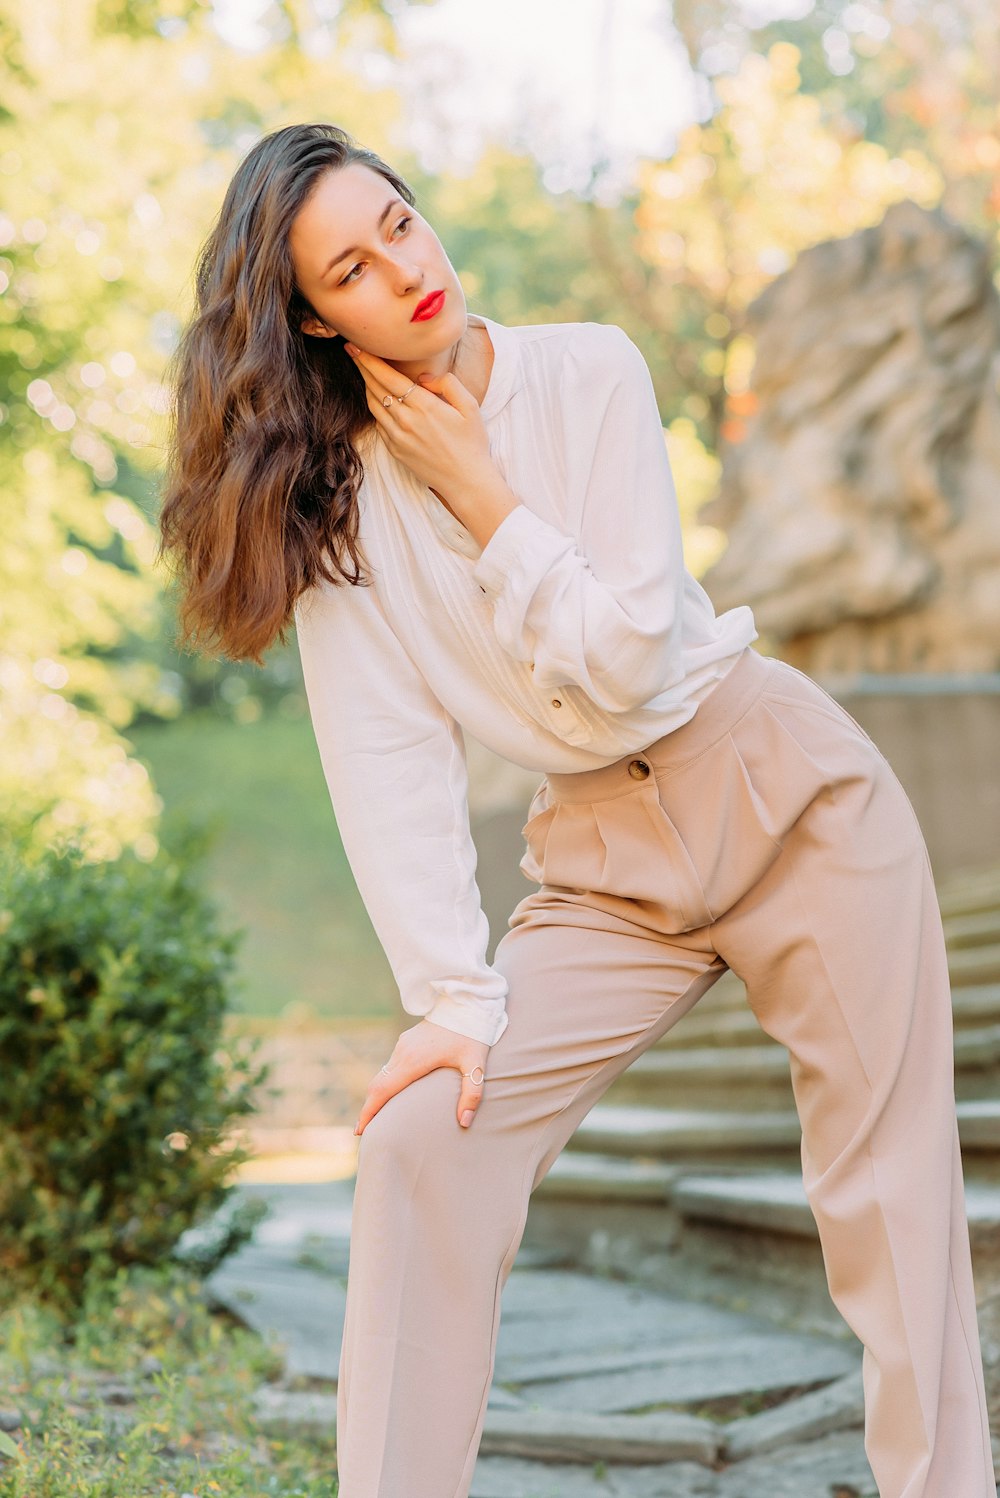 woman in white long sleeve shirt and beige pants sitting on brown wooden bench during daytime